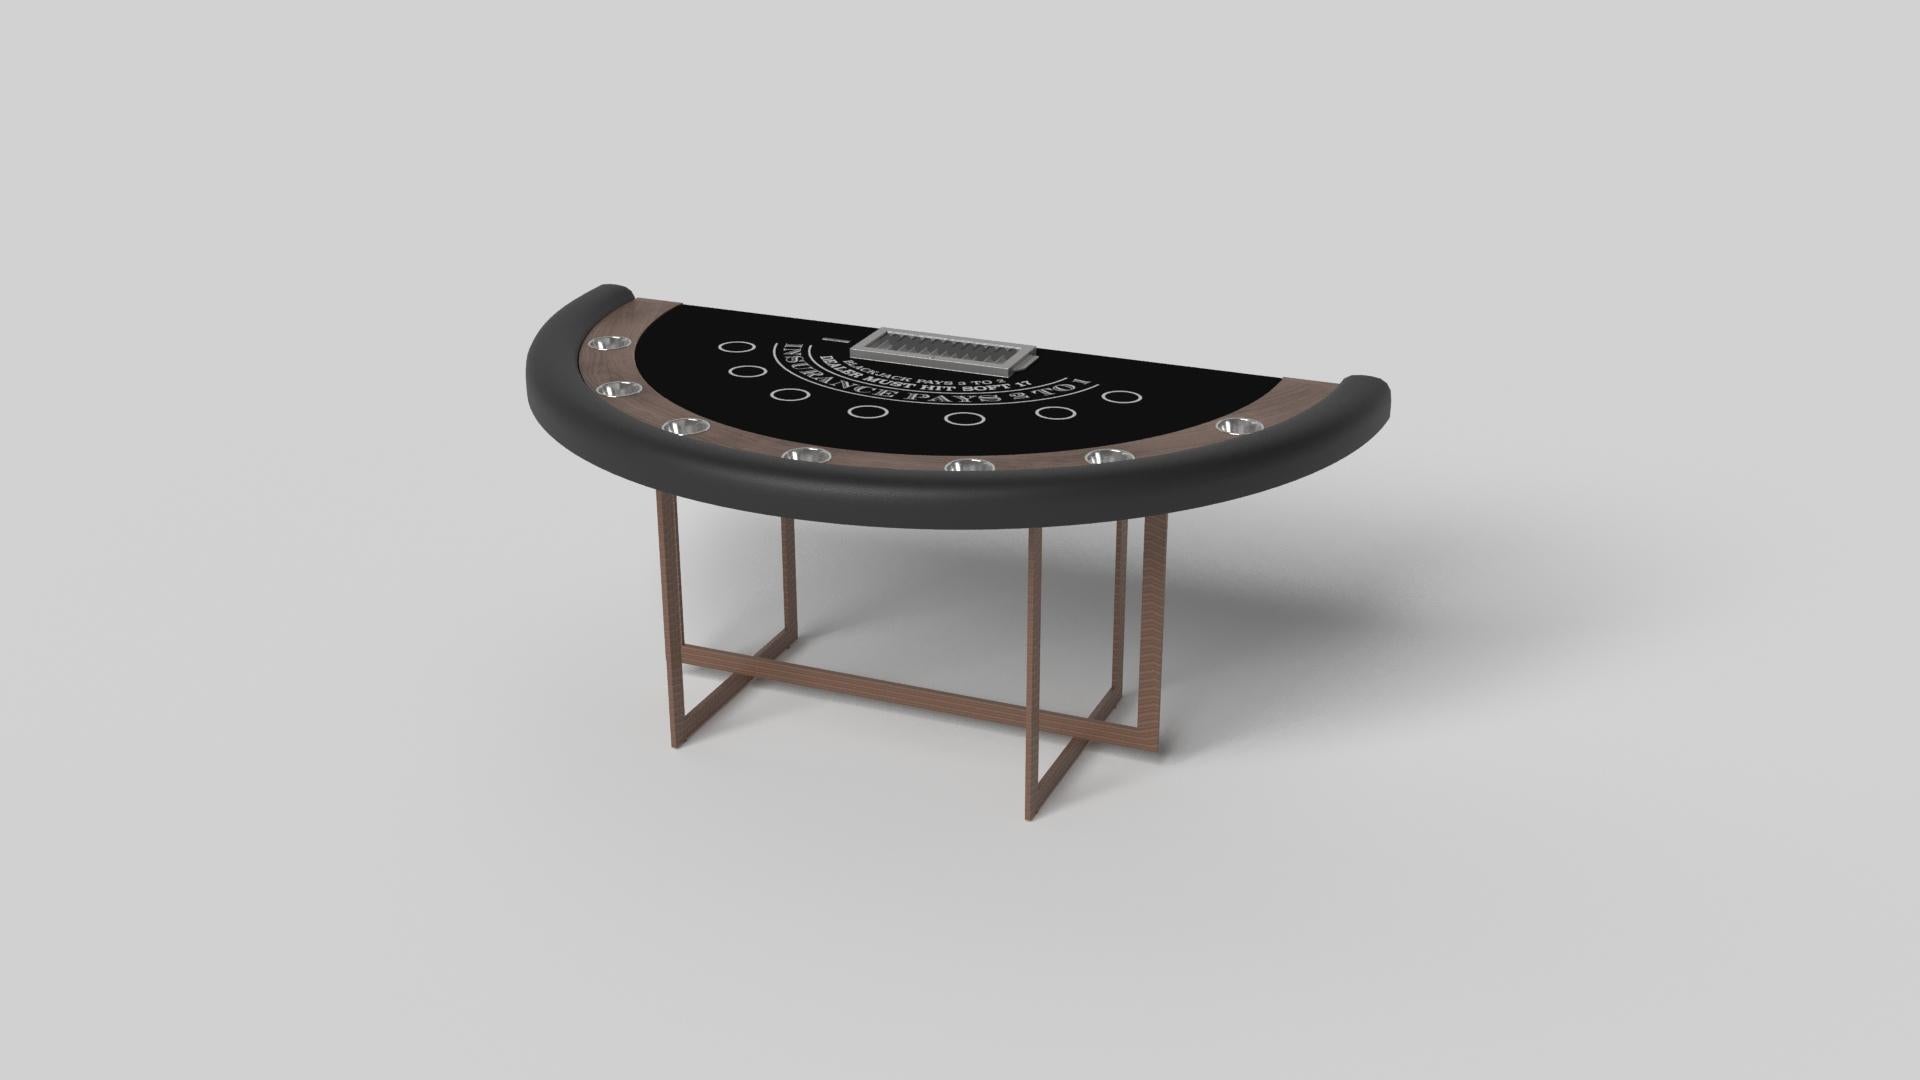 With an open metal foundation, our Beso table is a unique expression of contemporary forms and negative space. This blackjack table is handcrafted by our master artisans with a rectangle-in-rectangle base that echoes the angles and edges of a